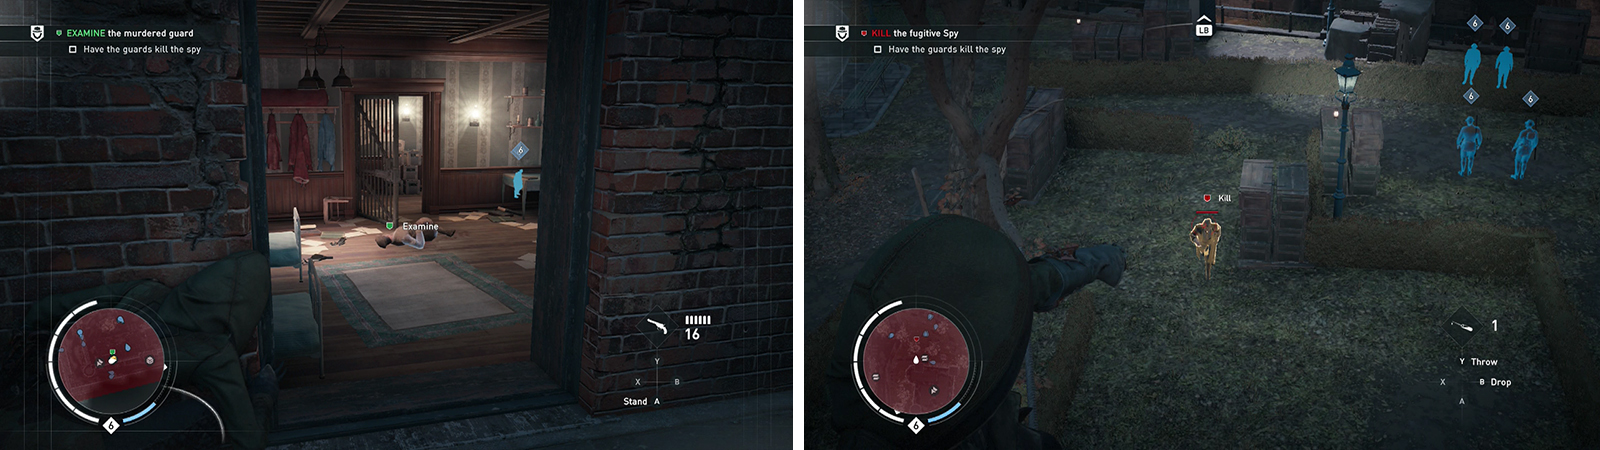 Investigate the body in the building (left). Use a hallucinogenic dart on the target to have the guards kill him (right).